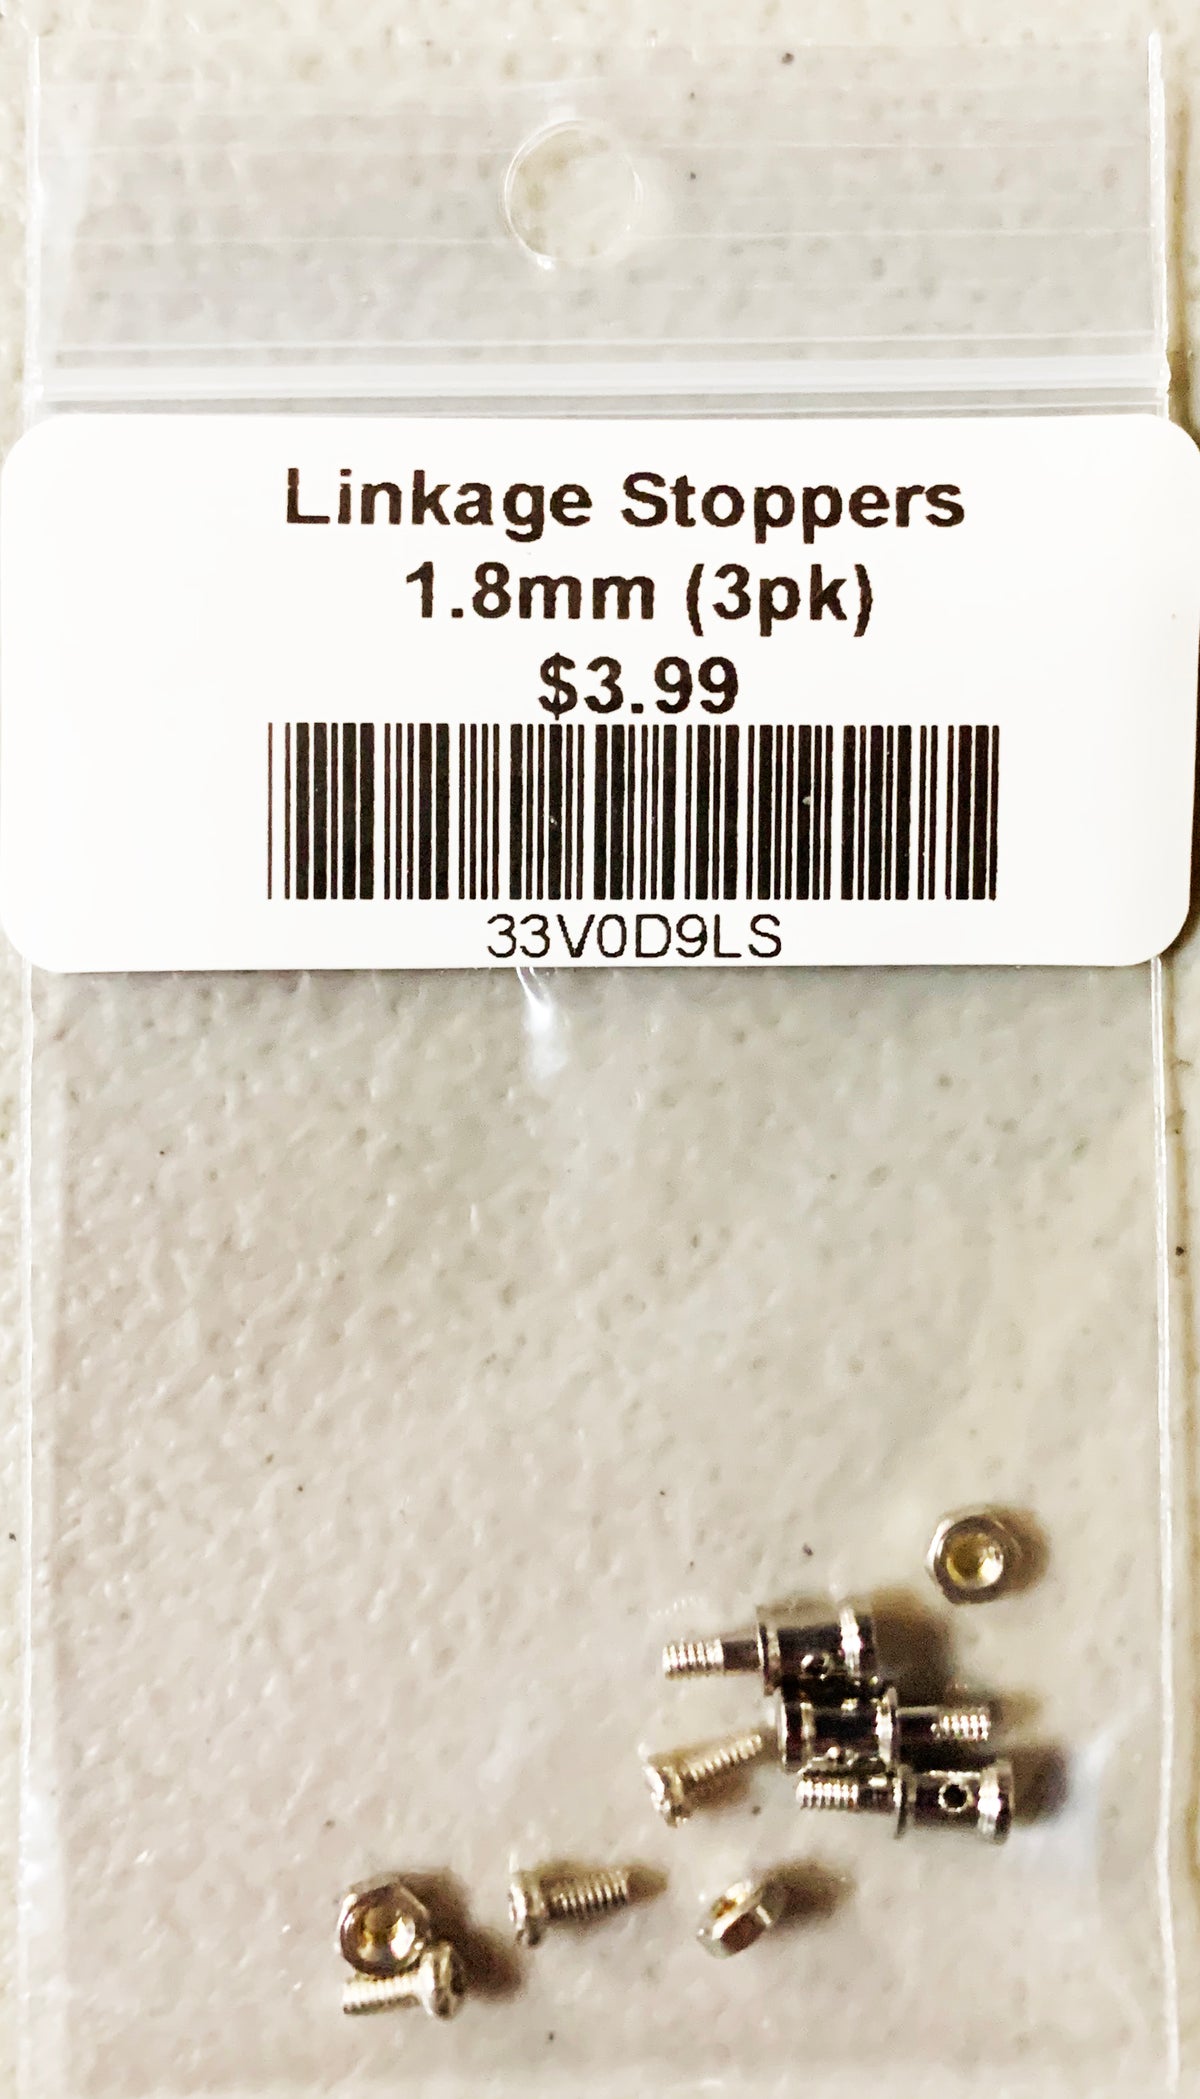 Linkage Stoppers 1.8mm (3pk)